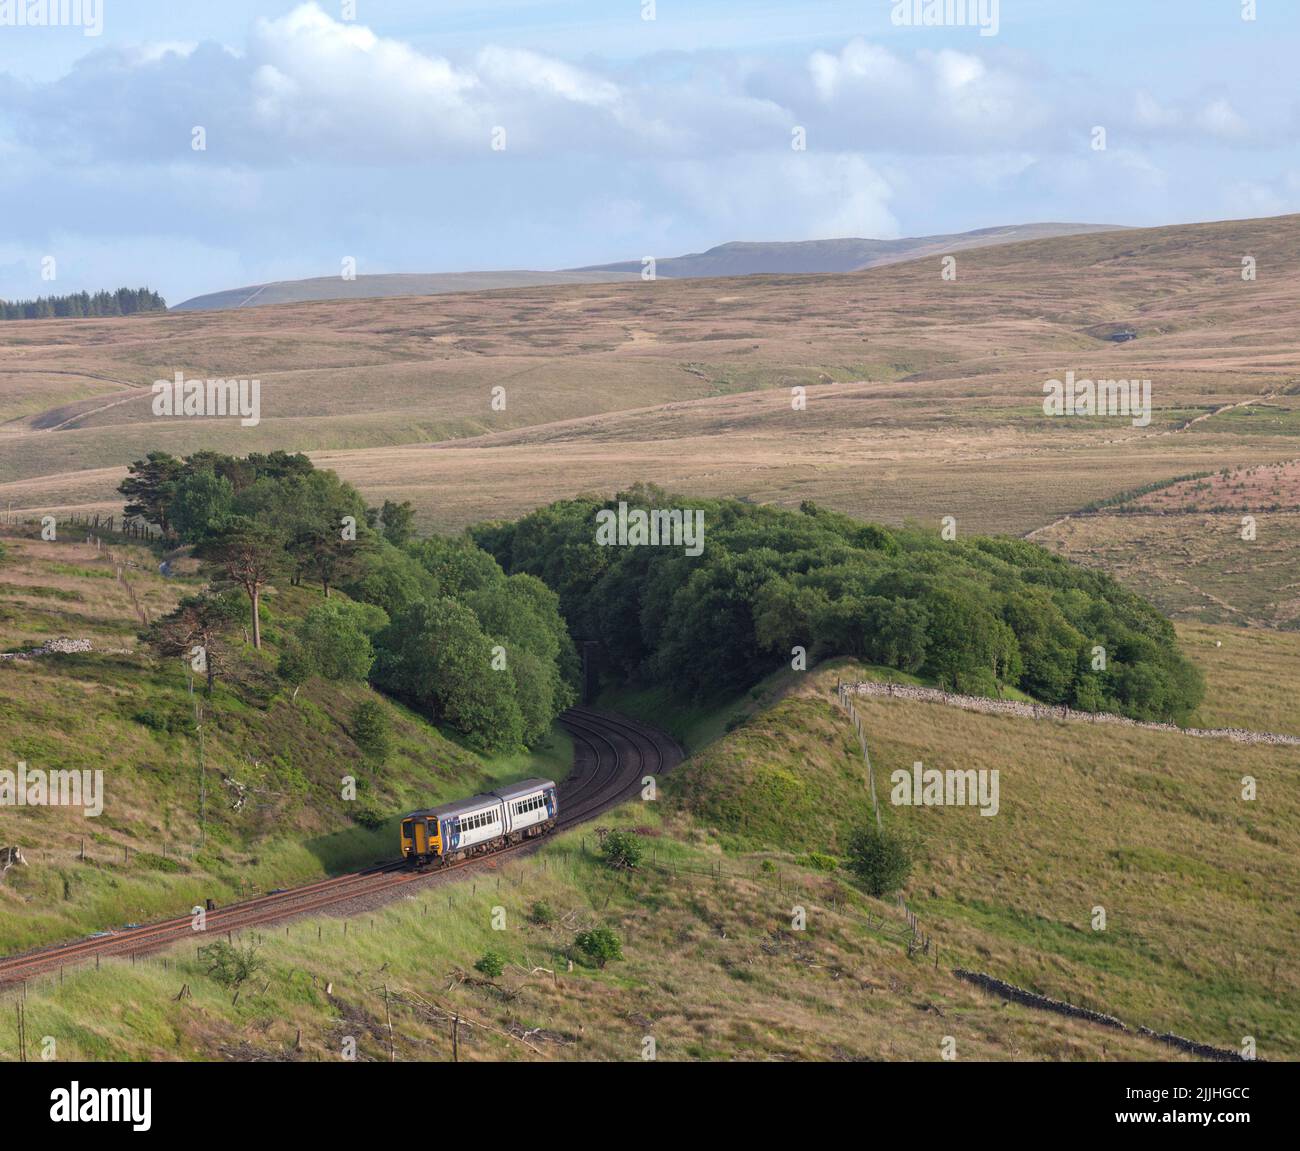 Northern Rail class 156 sprinter train in the countryside on the scenic Settle to Carlisle railway line near dent approaching Rise Hill tunnel Stock Photo